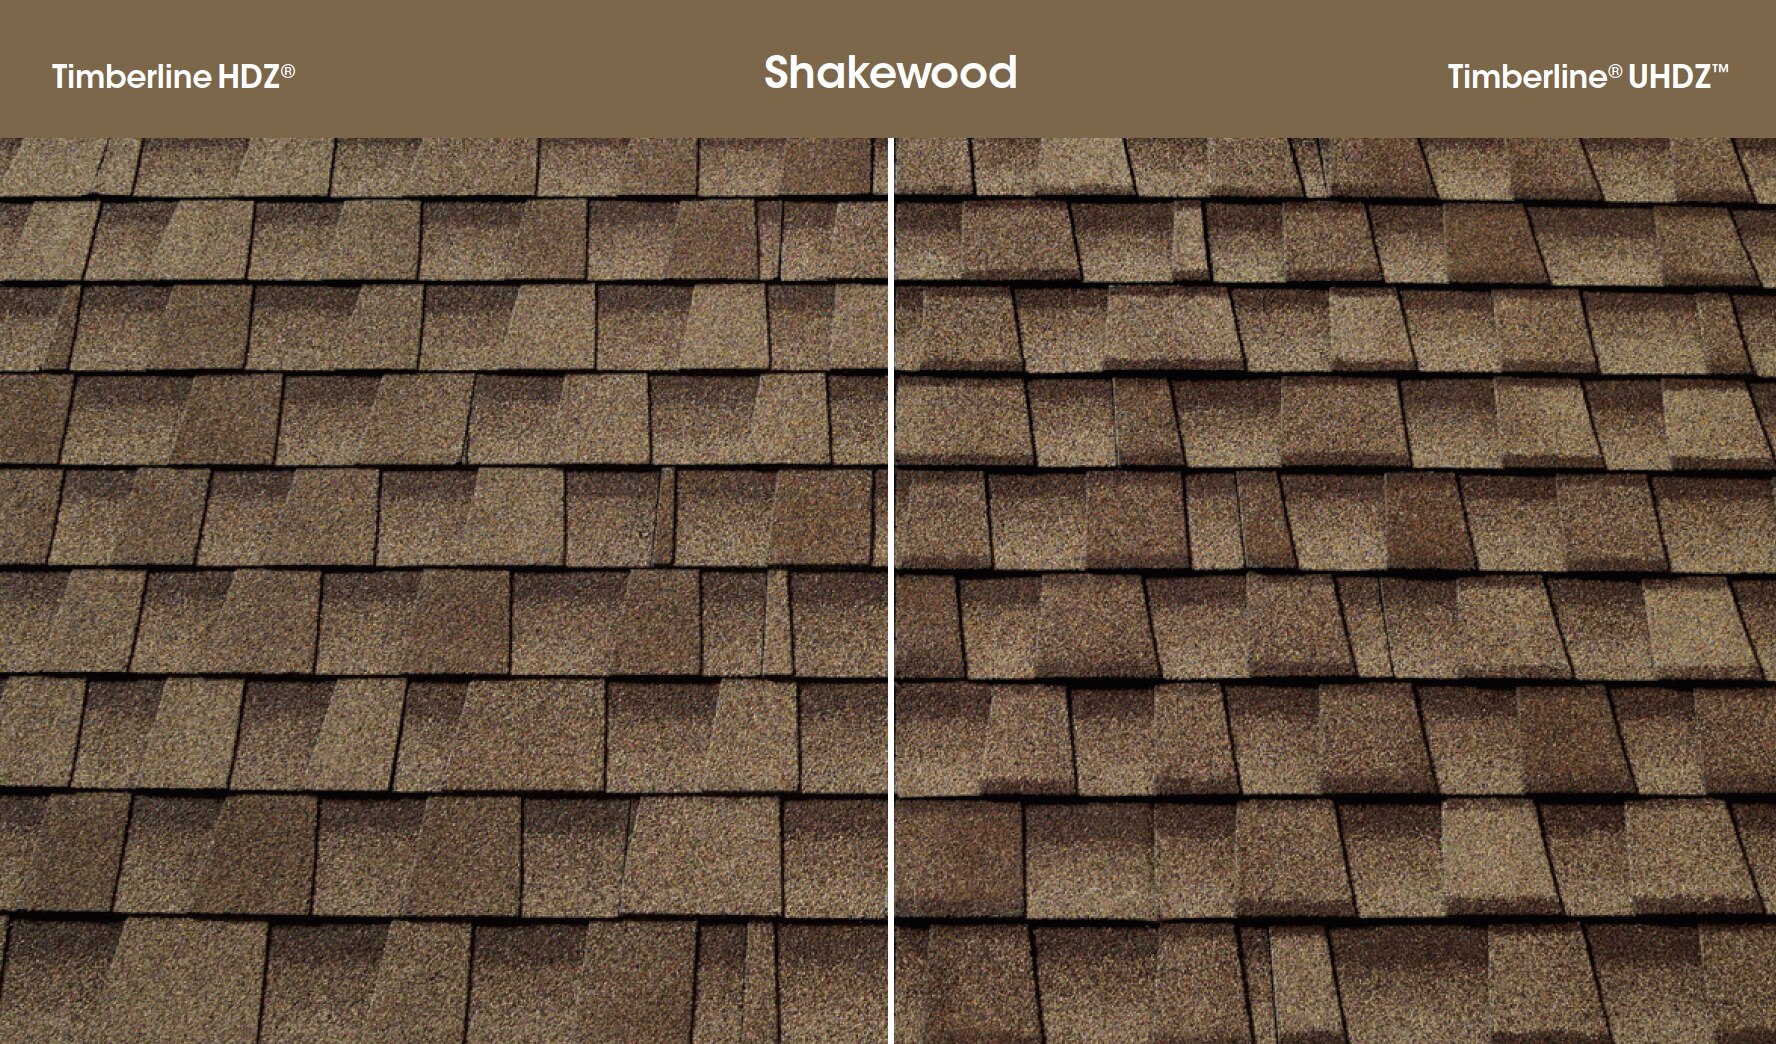 Timberline HDZ® Shingles and Timberline® UHDZ™ Shingles side-by-side comparison, showing the increased dimensionality produced by UHDZ™'s Dual Shadow Line